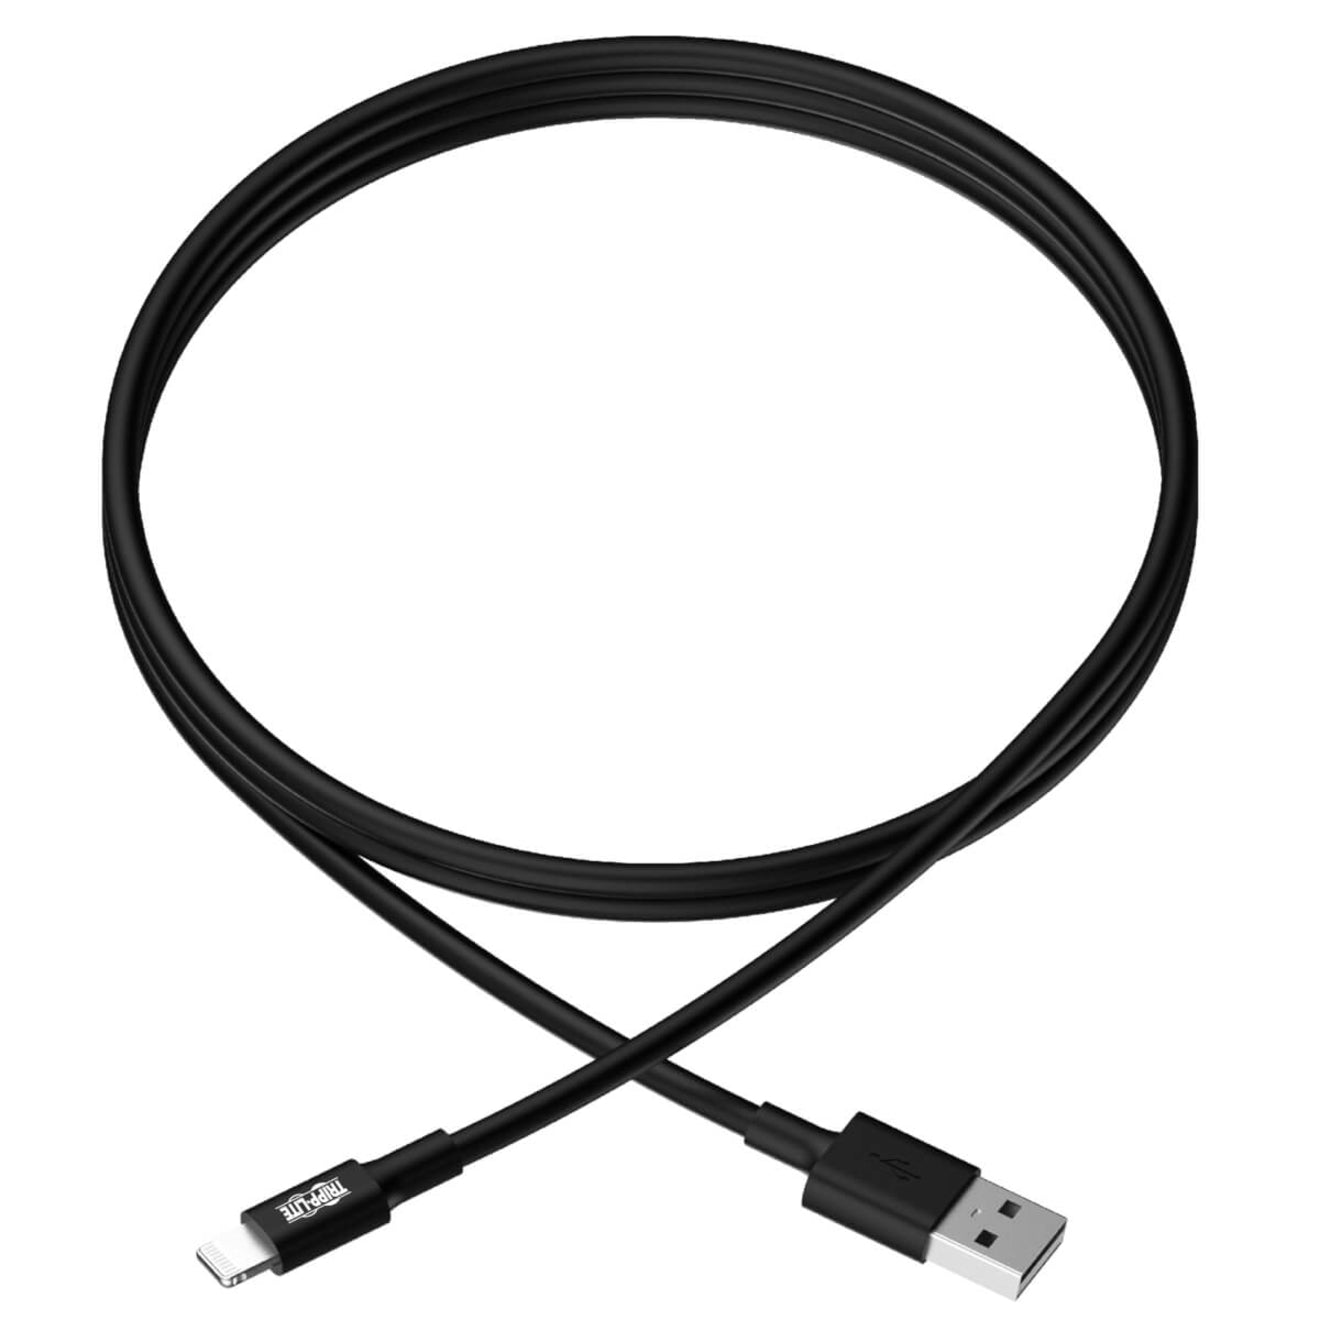 Tripp Lite M100-10N-BK USB Sync/Charge Cable with Lightning Connector - Black, 10-in